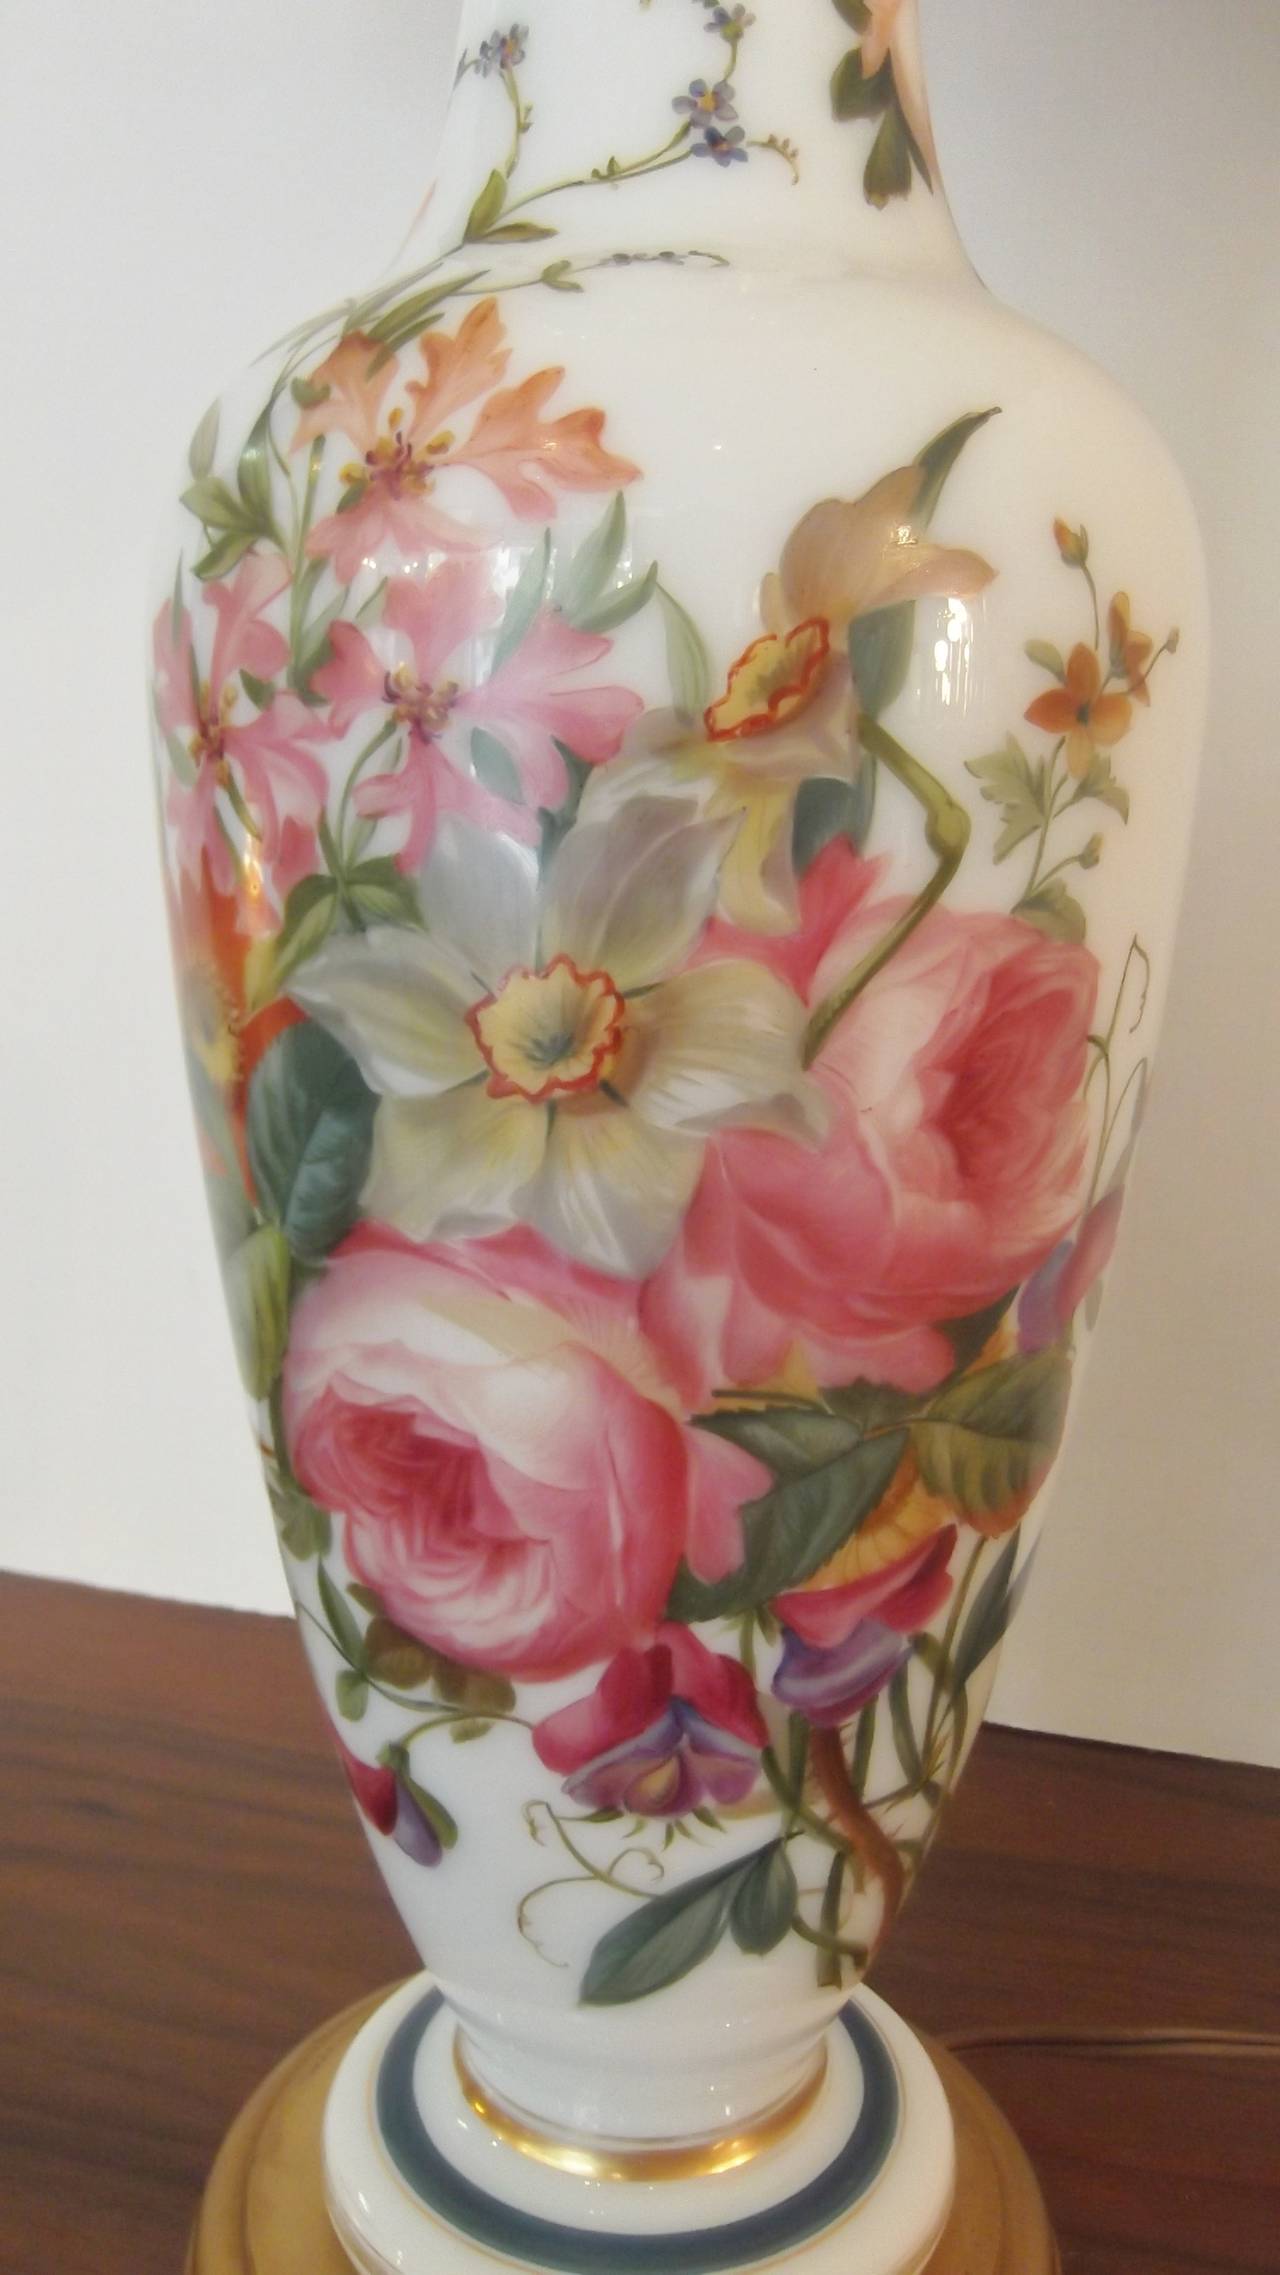 Napoleon III French Opaline Enamel Painted Vase Lamp by Jean-Francois Robert, Baccarat 1840